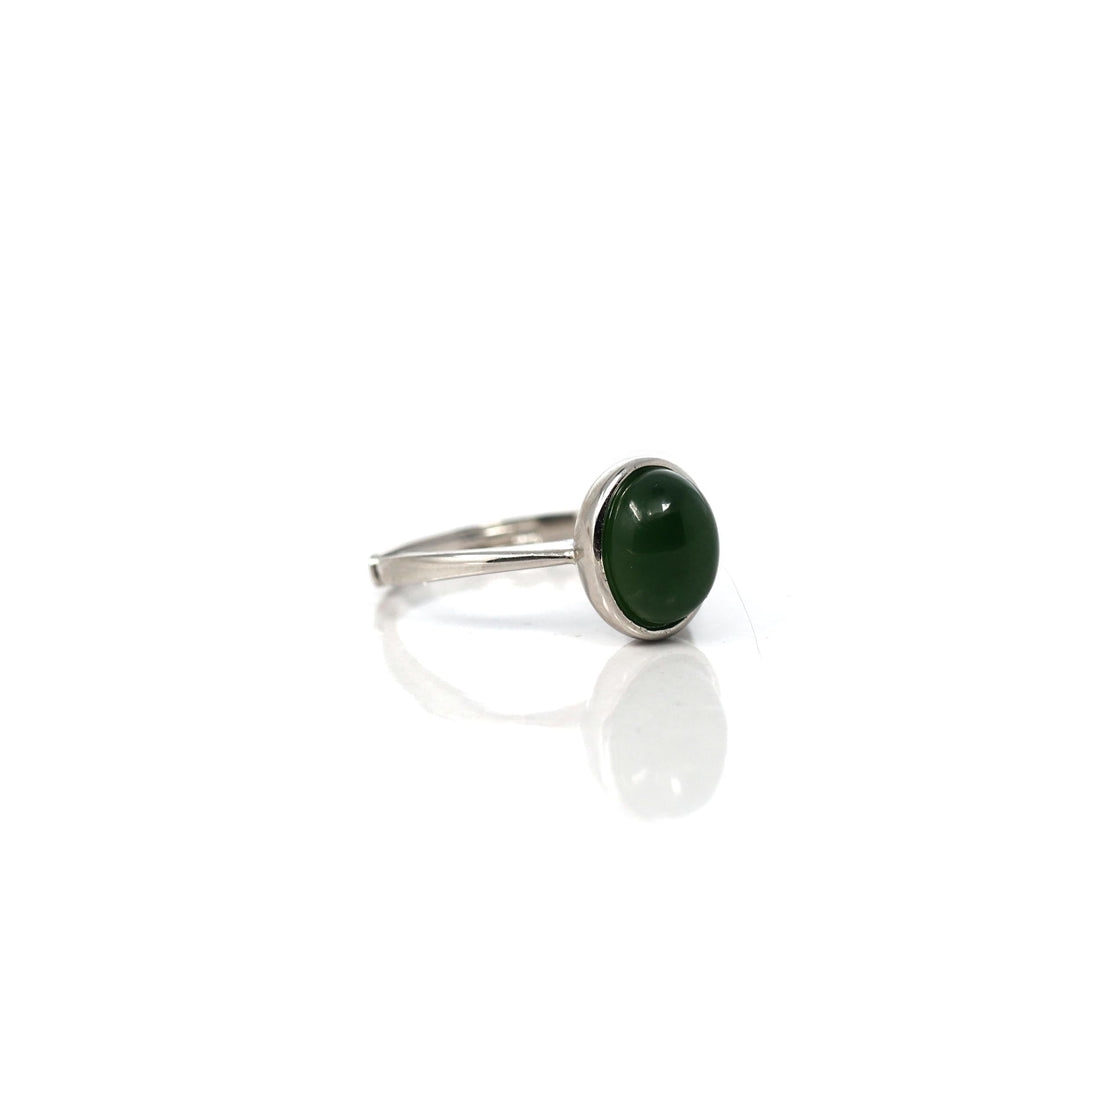 Baikalla Jewelry Jade Ring Baikalla™ "Classic Oval" Sterling Silver Real Green Nephrite Jade Classic Ring For Her